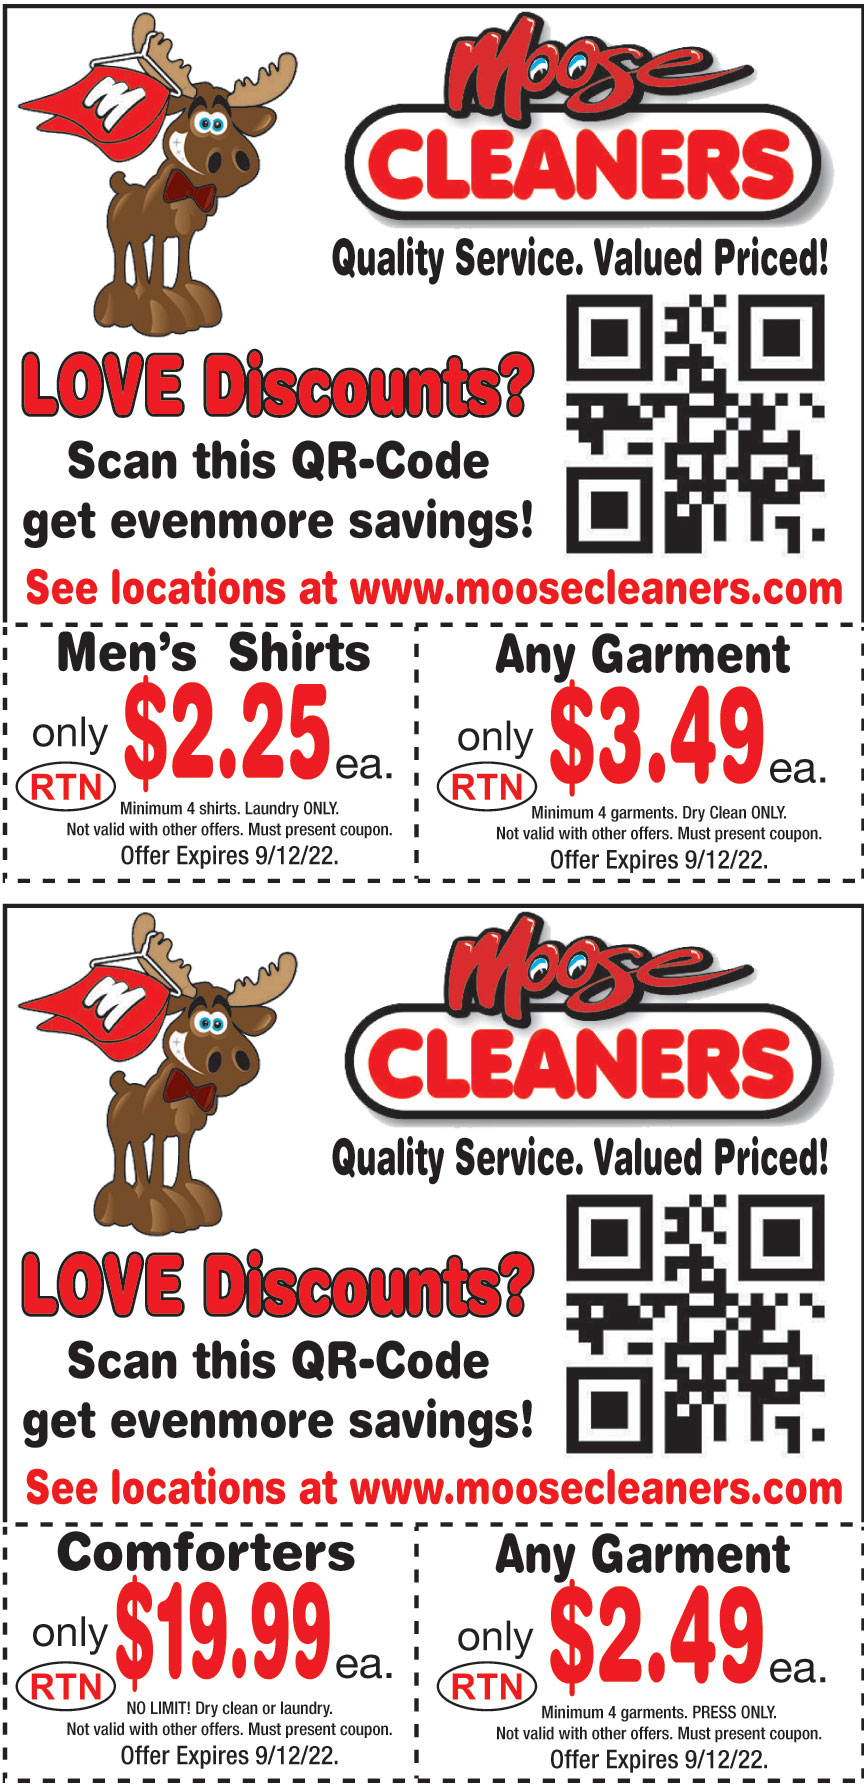 MOOSE CLEANERS